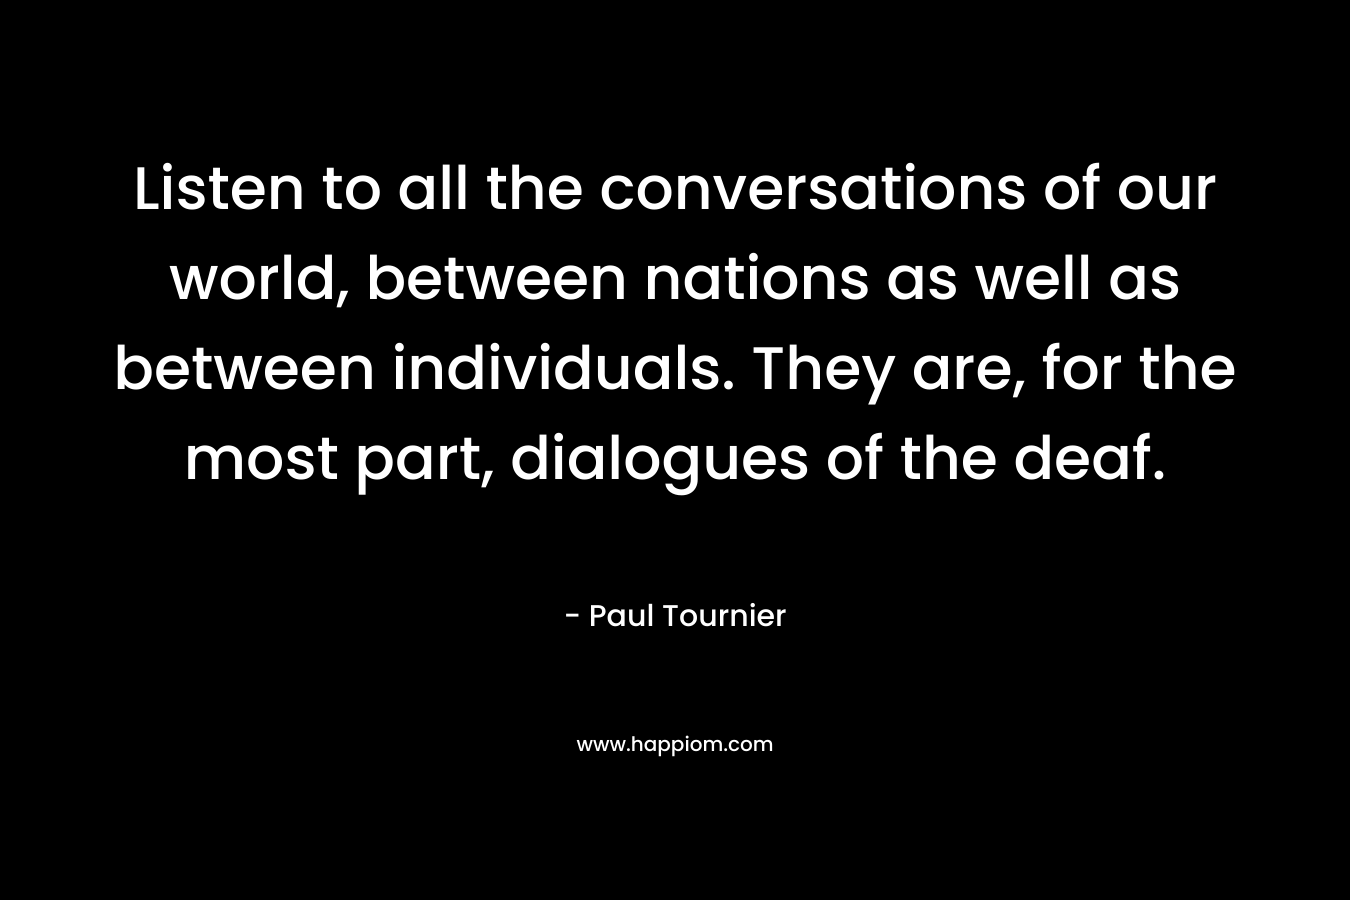 Listen to all the conversations of our world, between nations as well as between individuals. They are, for the most part, dialogues of the deaf. – Paul Tournier